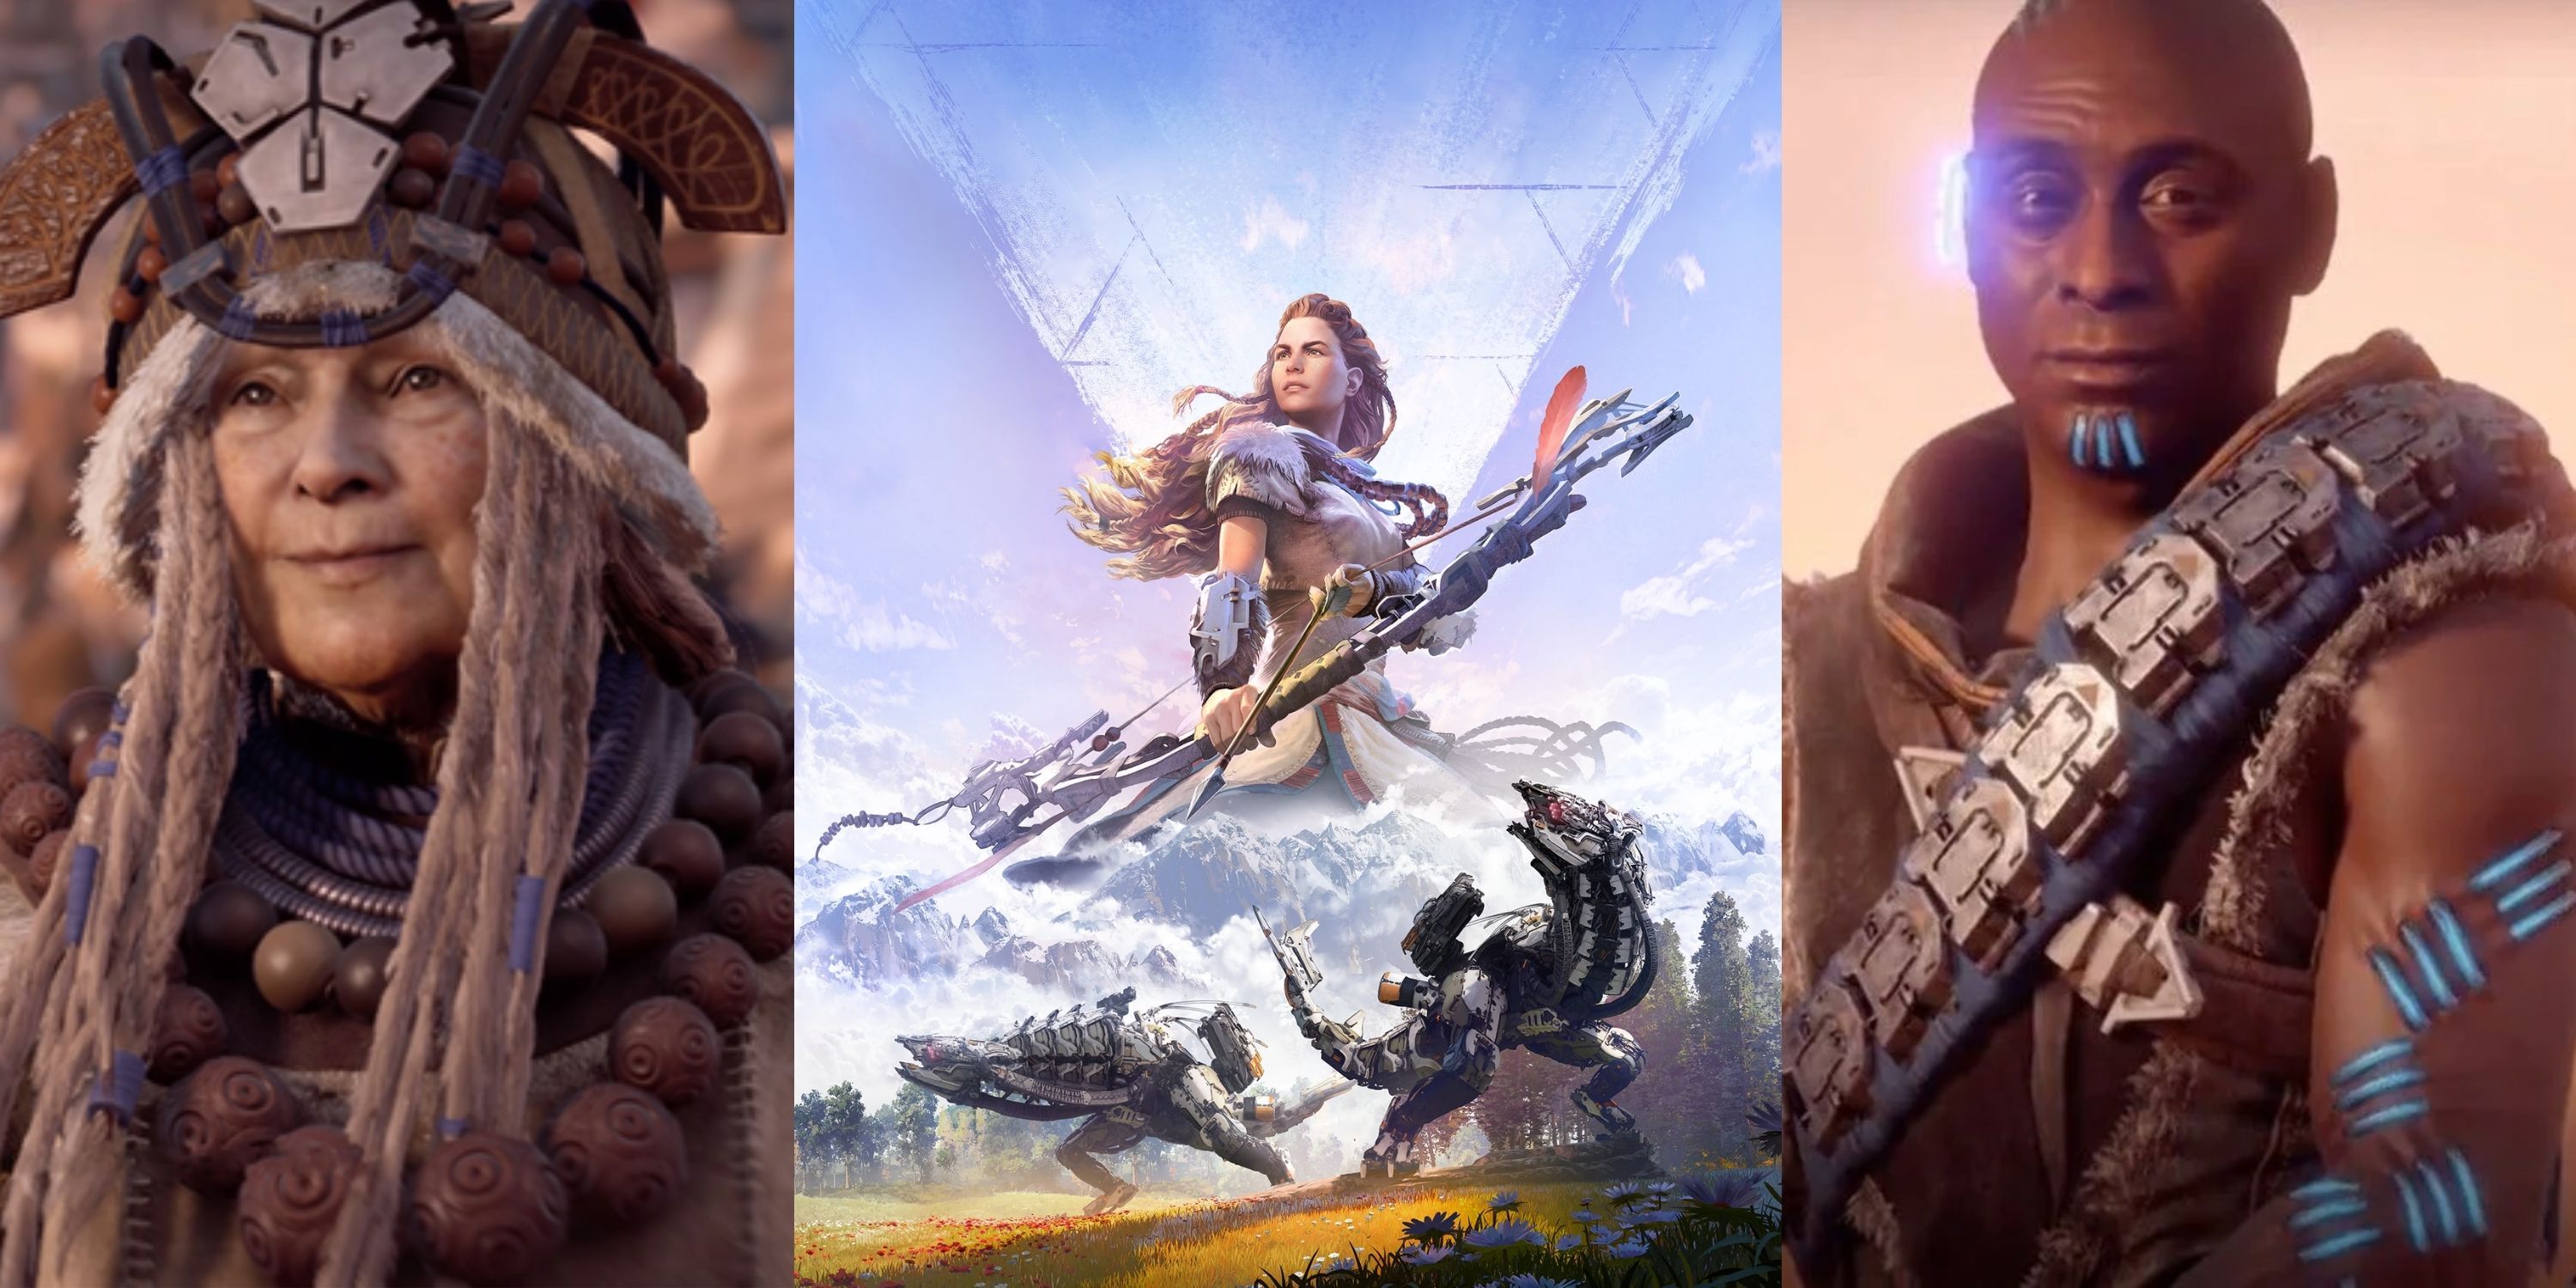 Characters from Horizon: Zero Dawn who should appear in the Live-action adaptation